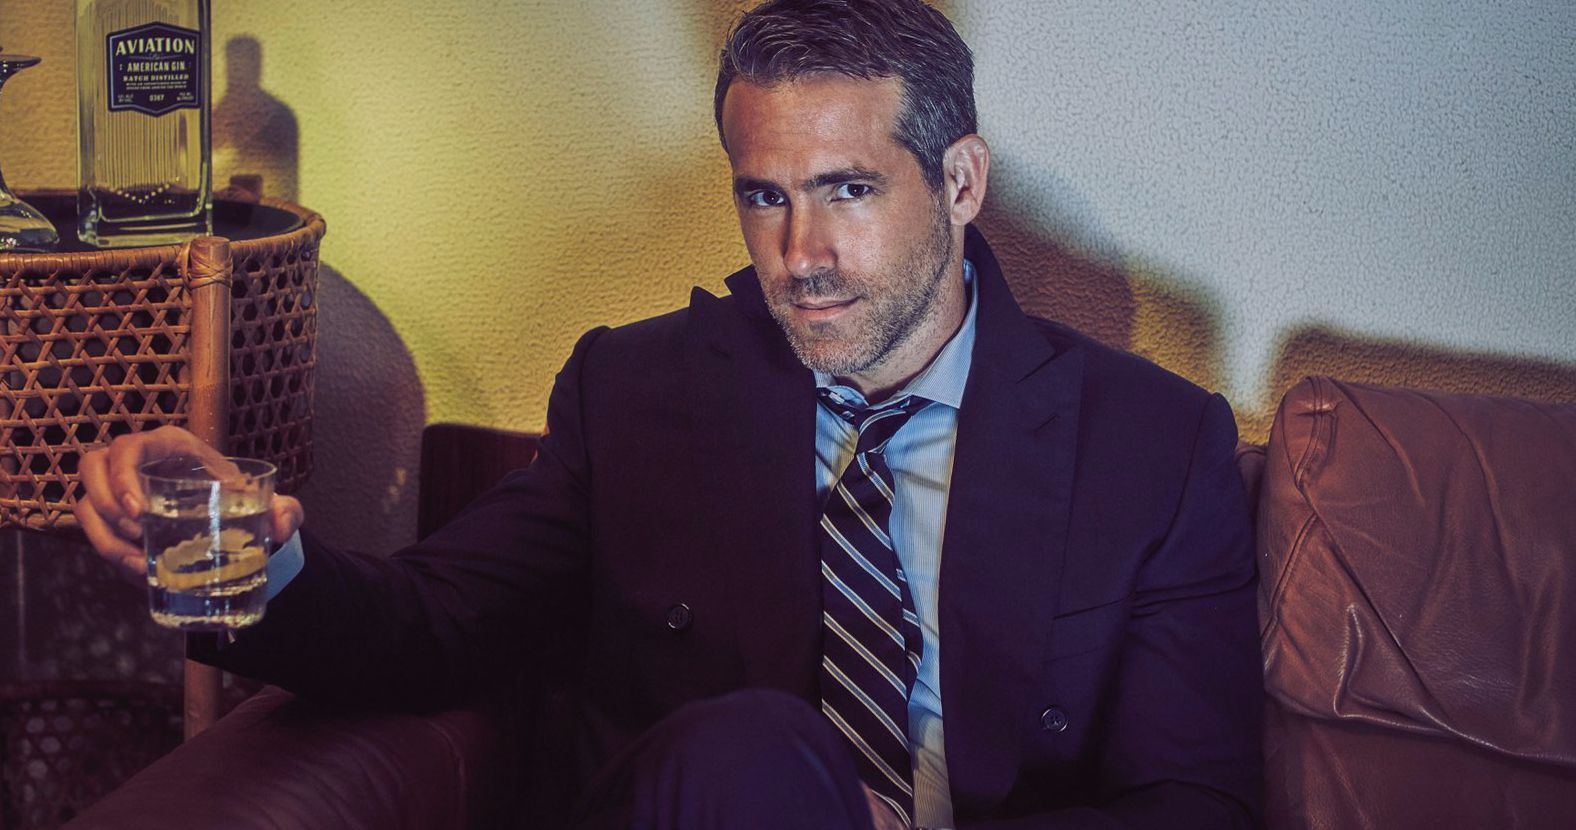 Ryan Reynolds Uses Aviation Gin Proceeds to Tip Out of Work Bartenders